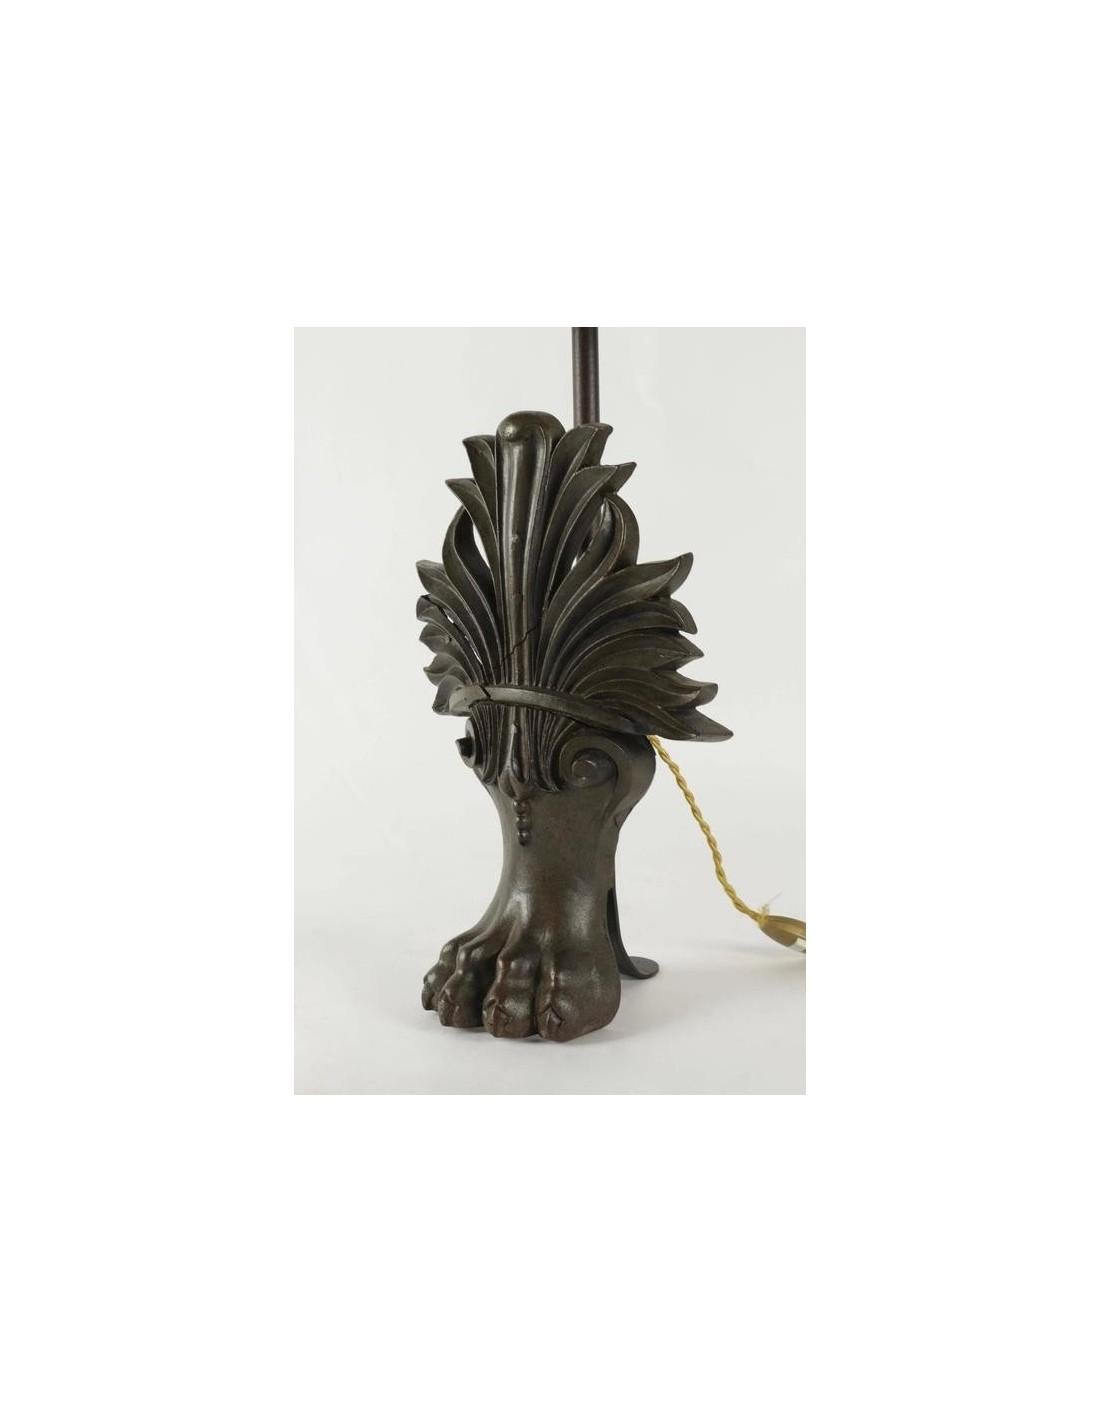 Napoleon III Antique Bathtub Lions Claw Foot Changed into a Lamp, 19th Century For Sale